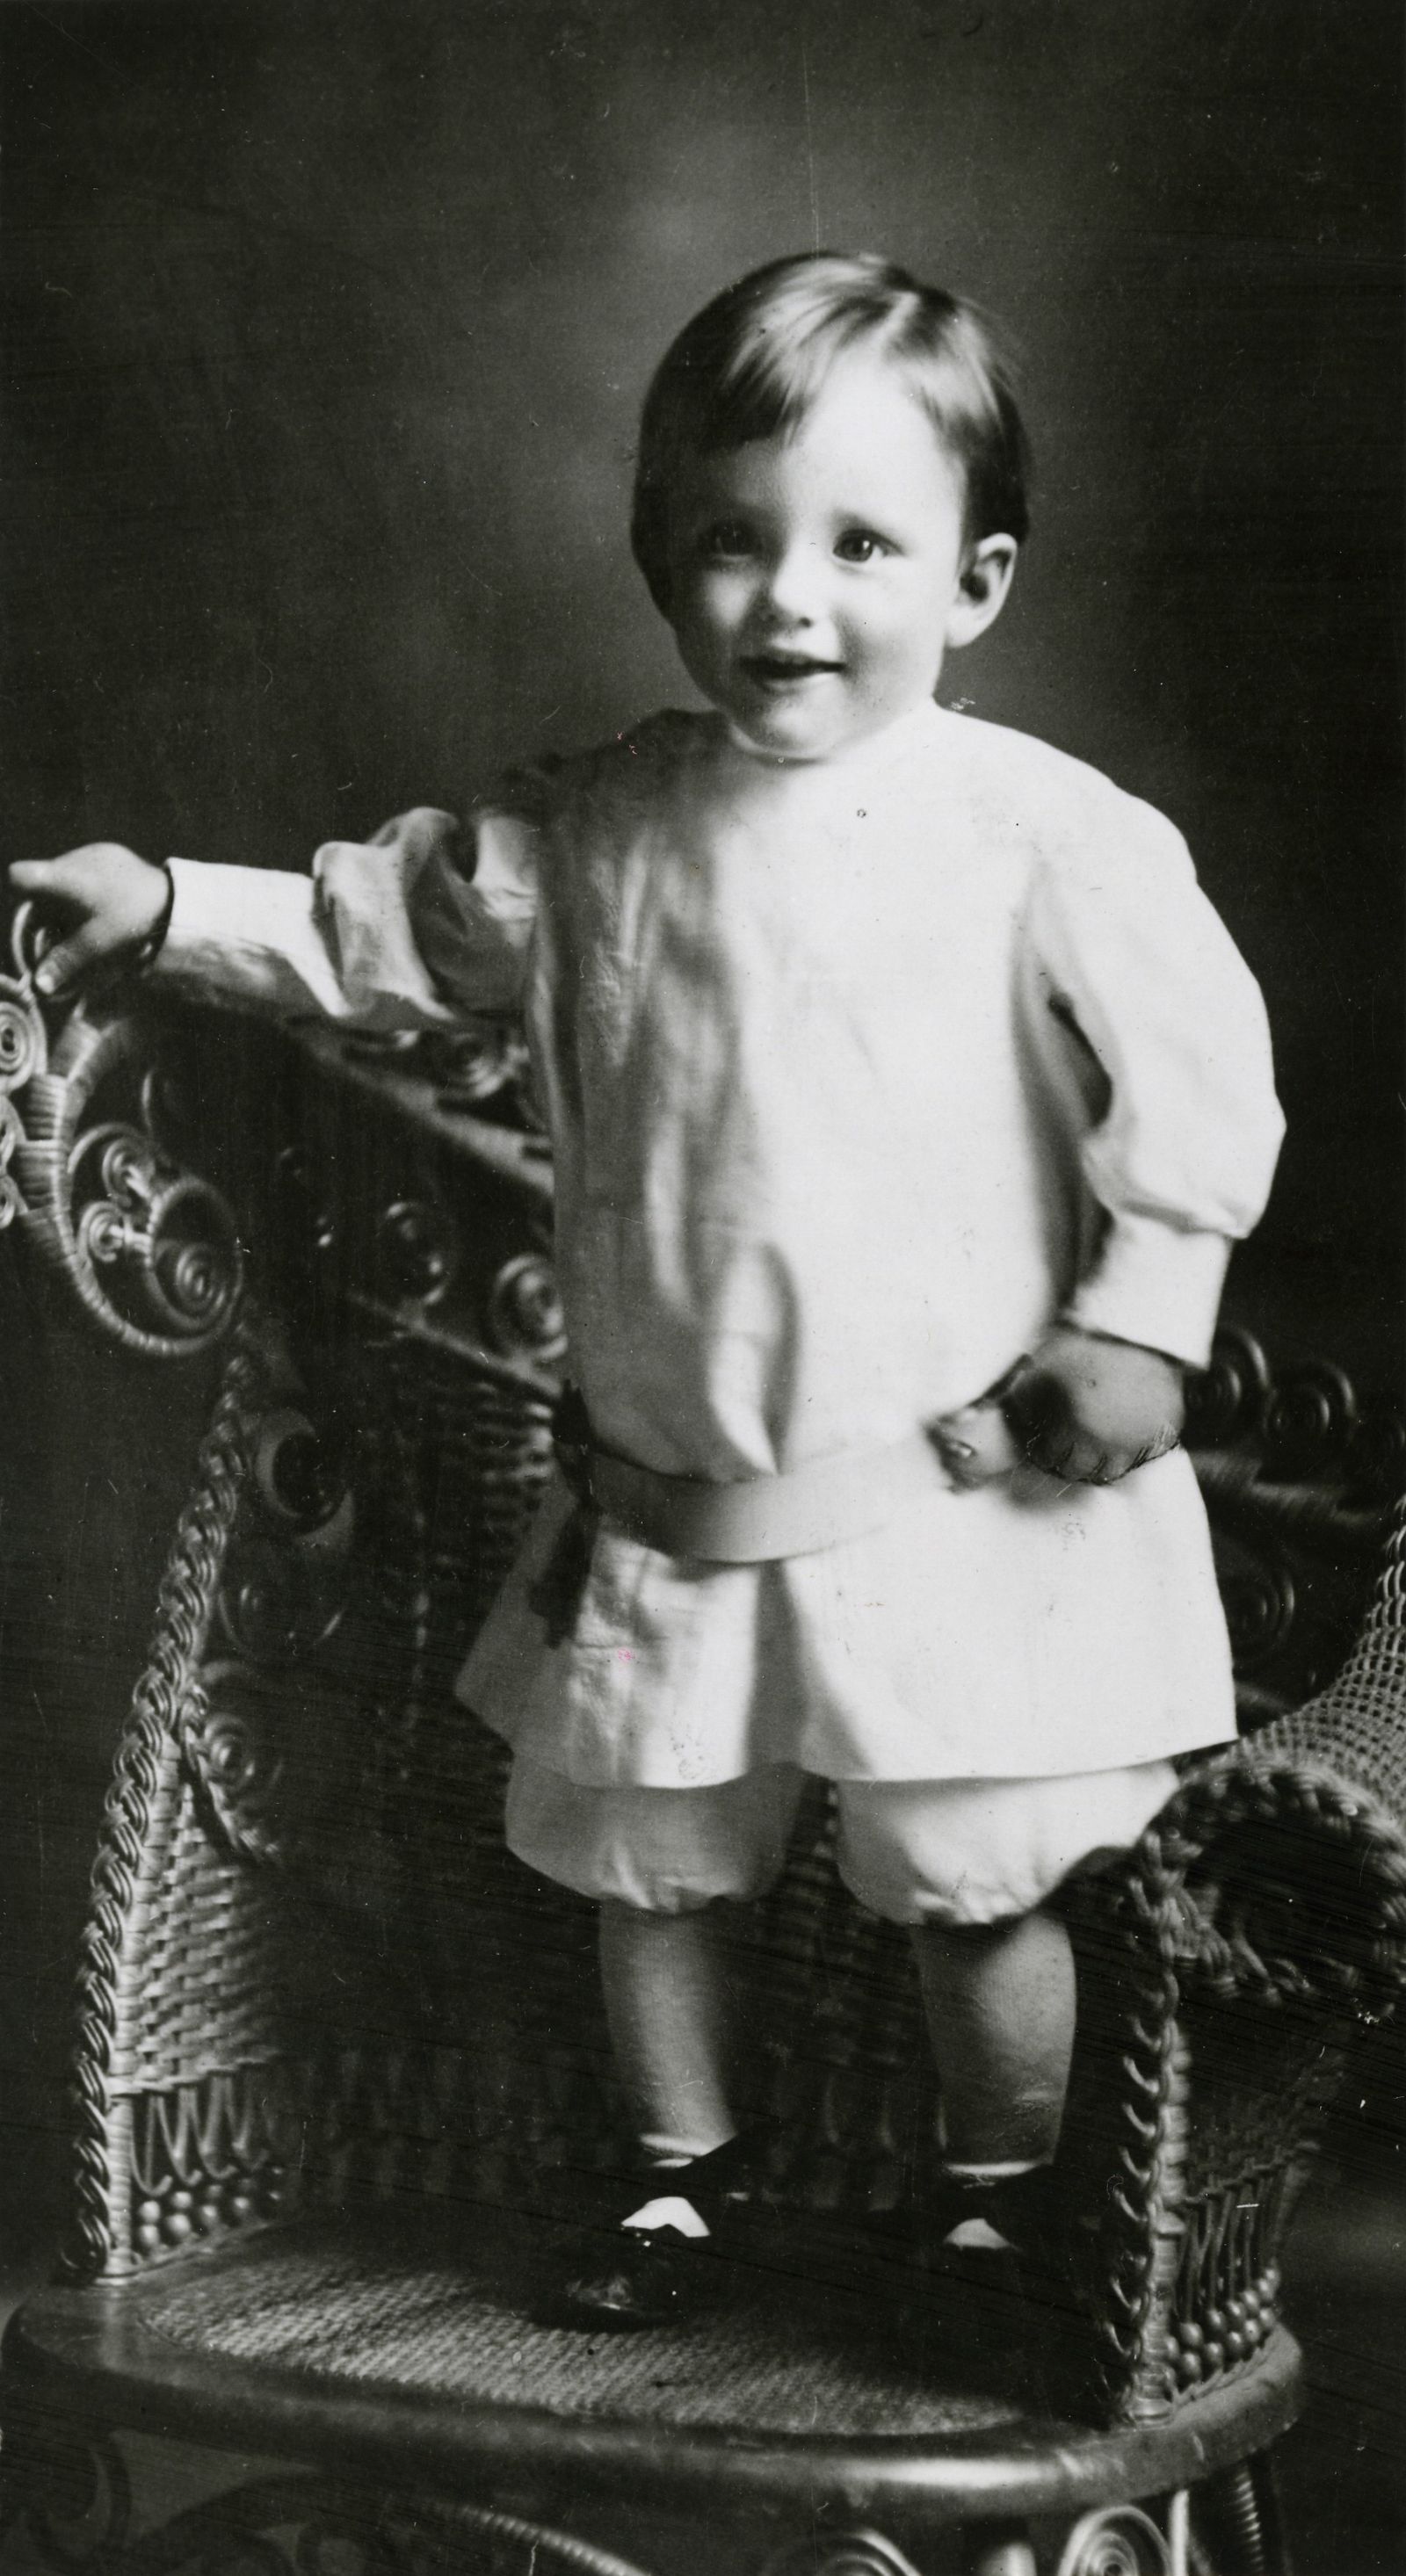 A photograph of President Howard W. Hunter as young boy.